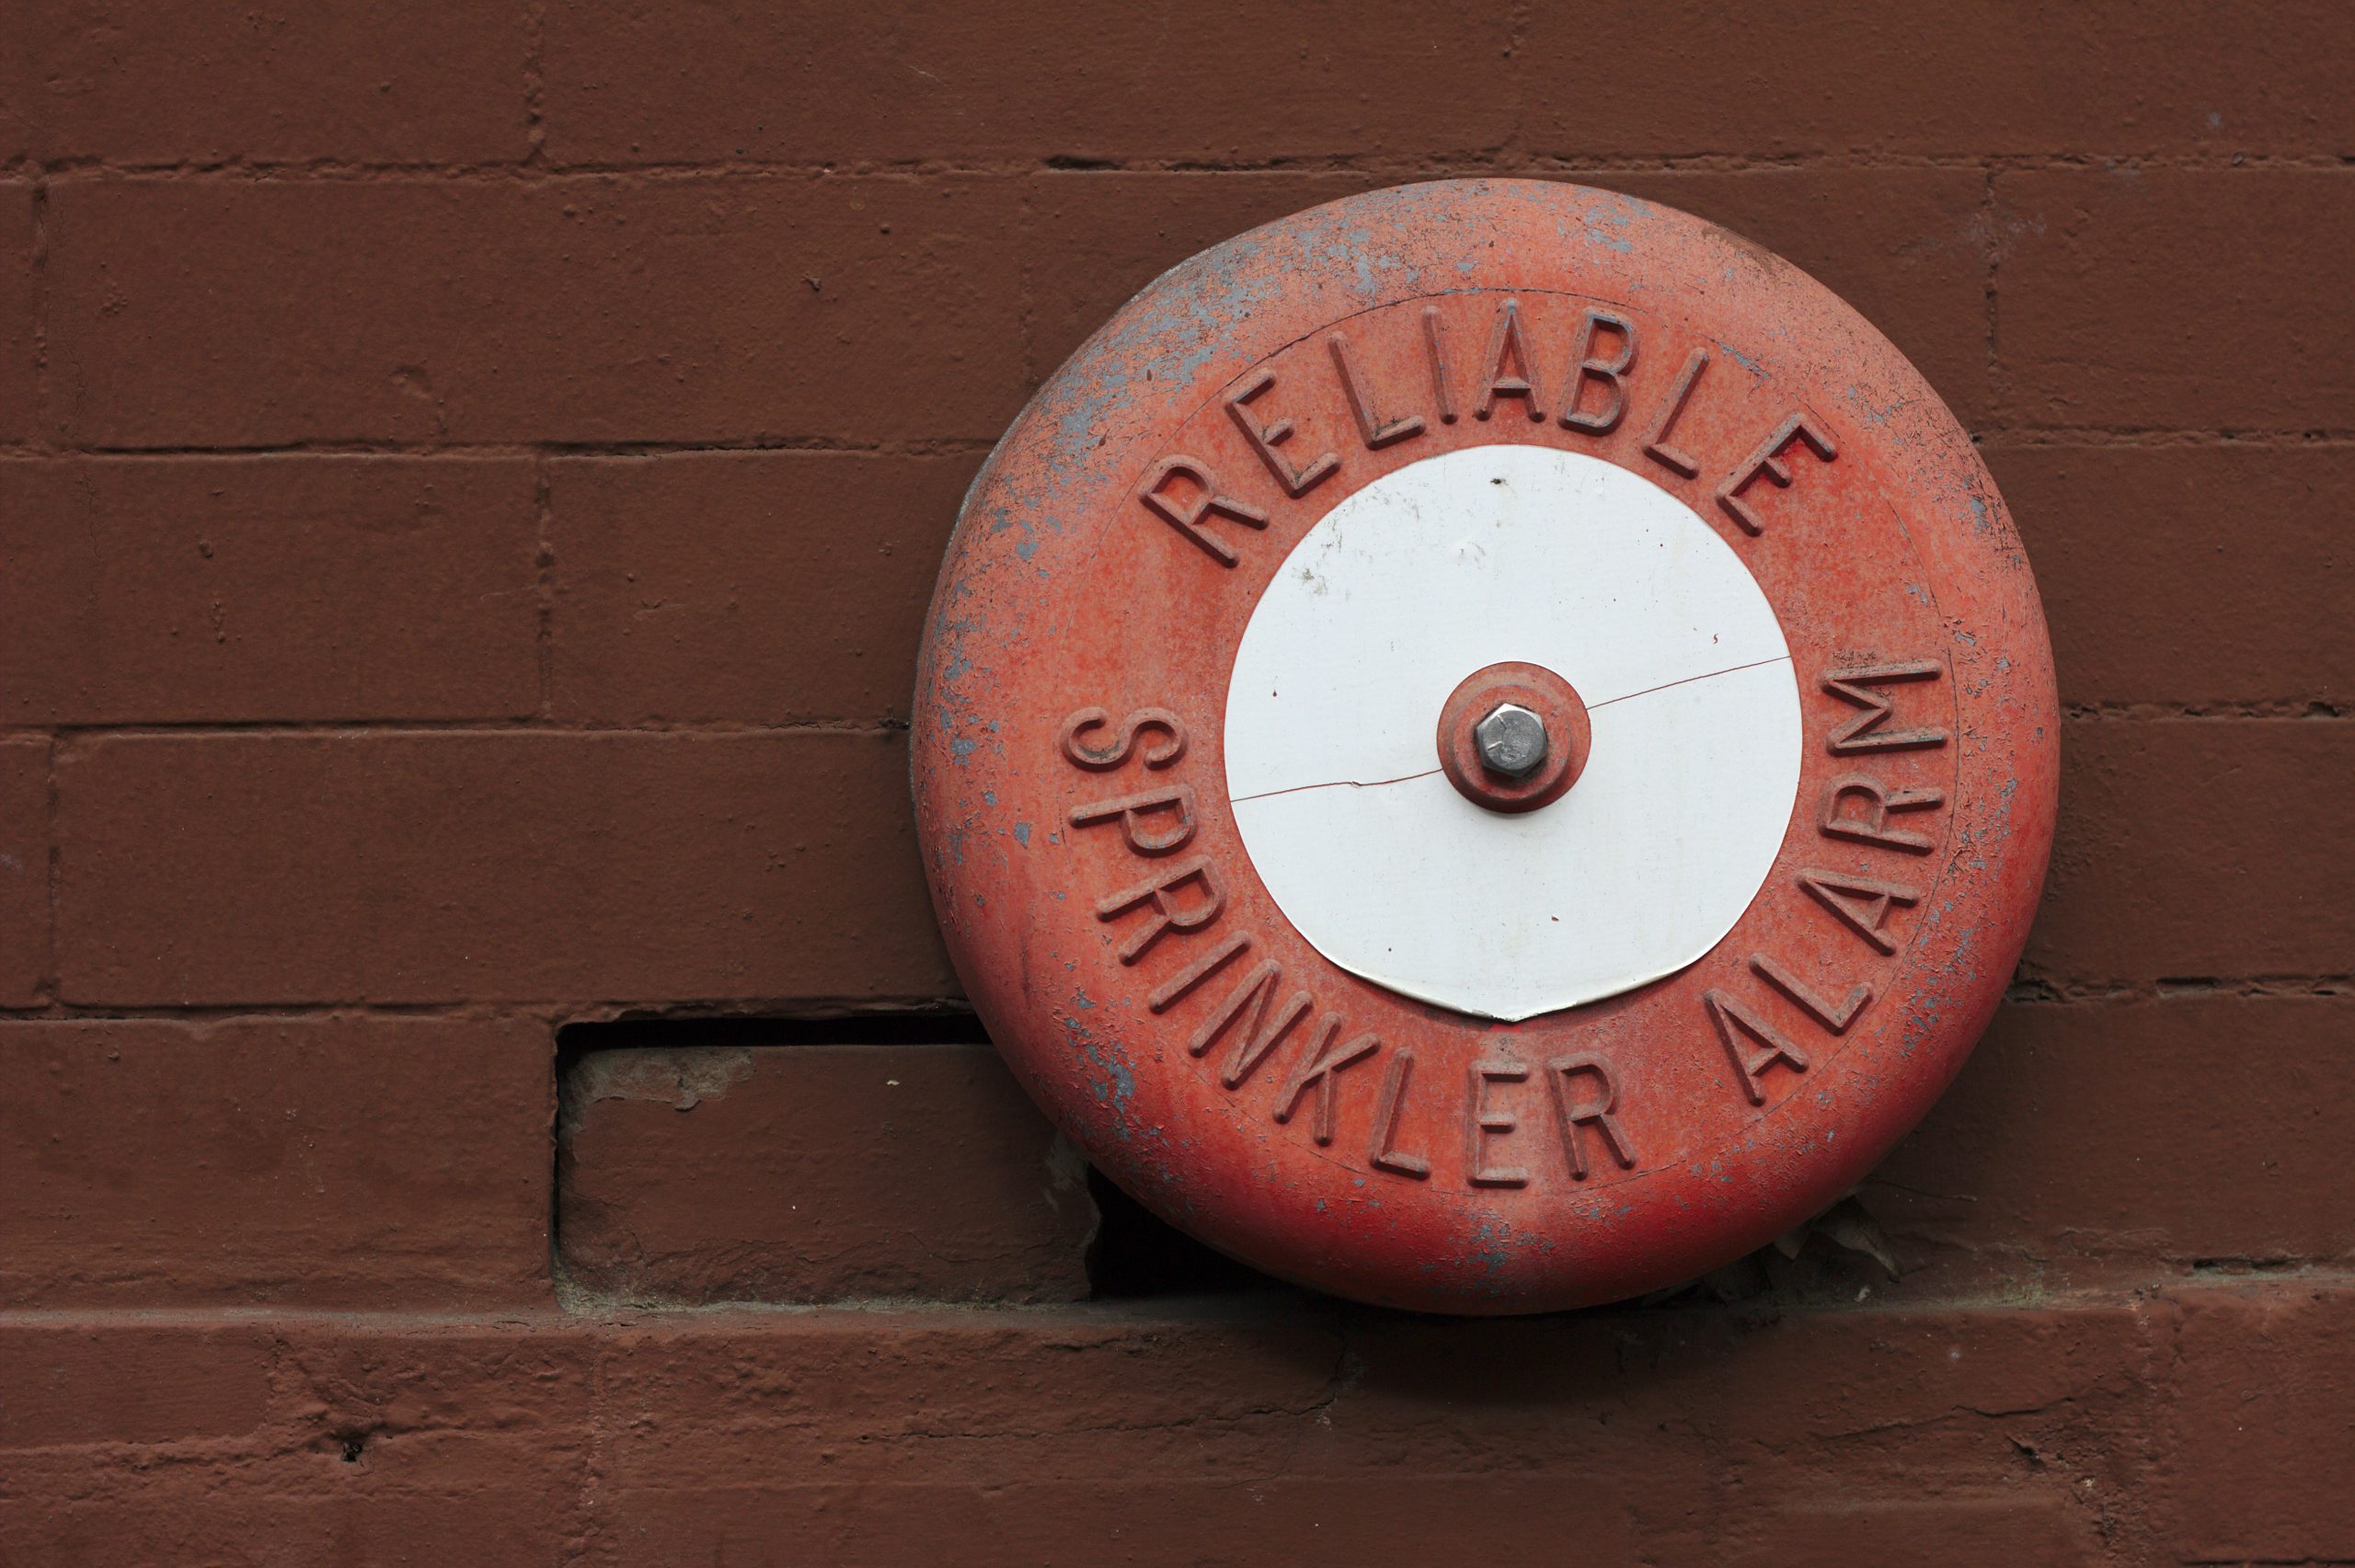 This image shows a round metal disk with the words "Reliable Sprinkler Alarm".